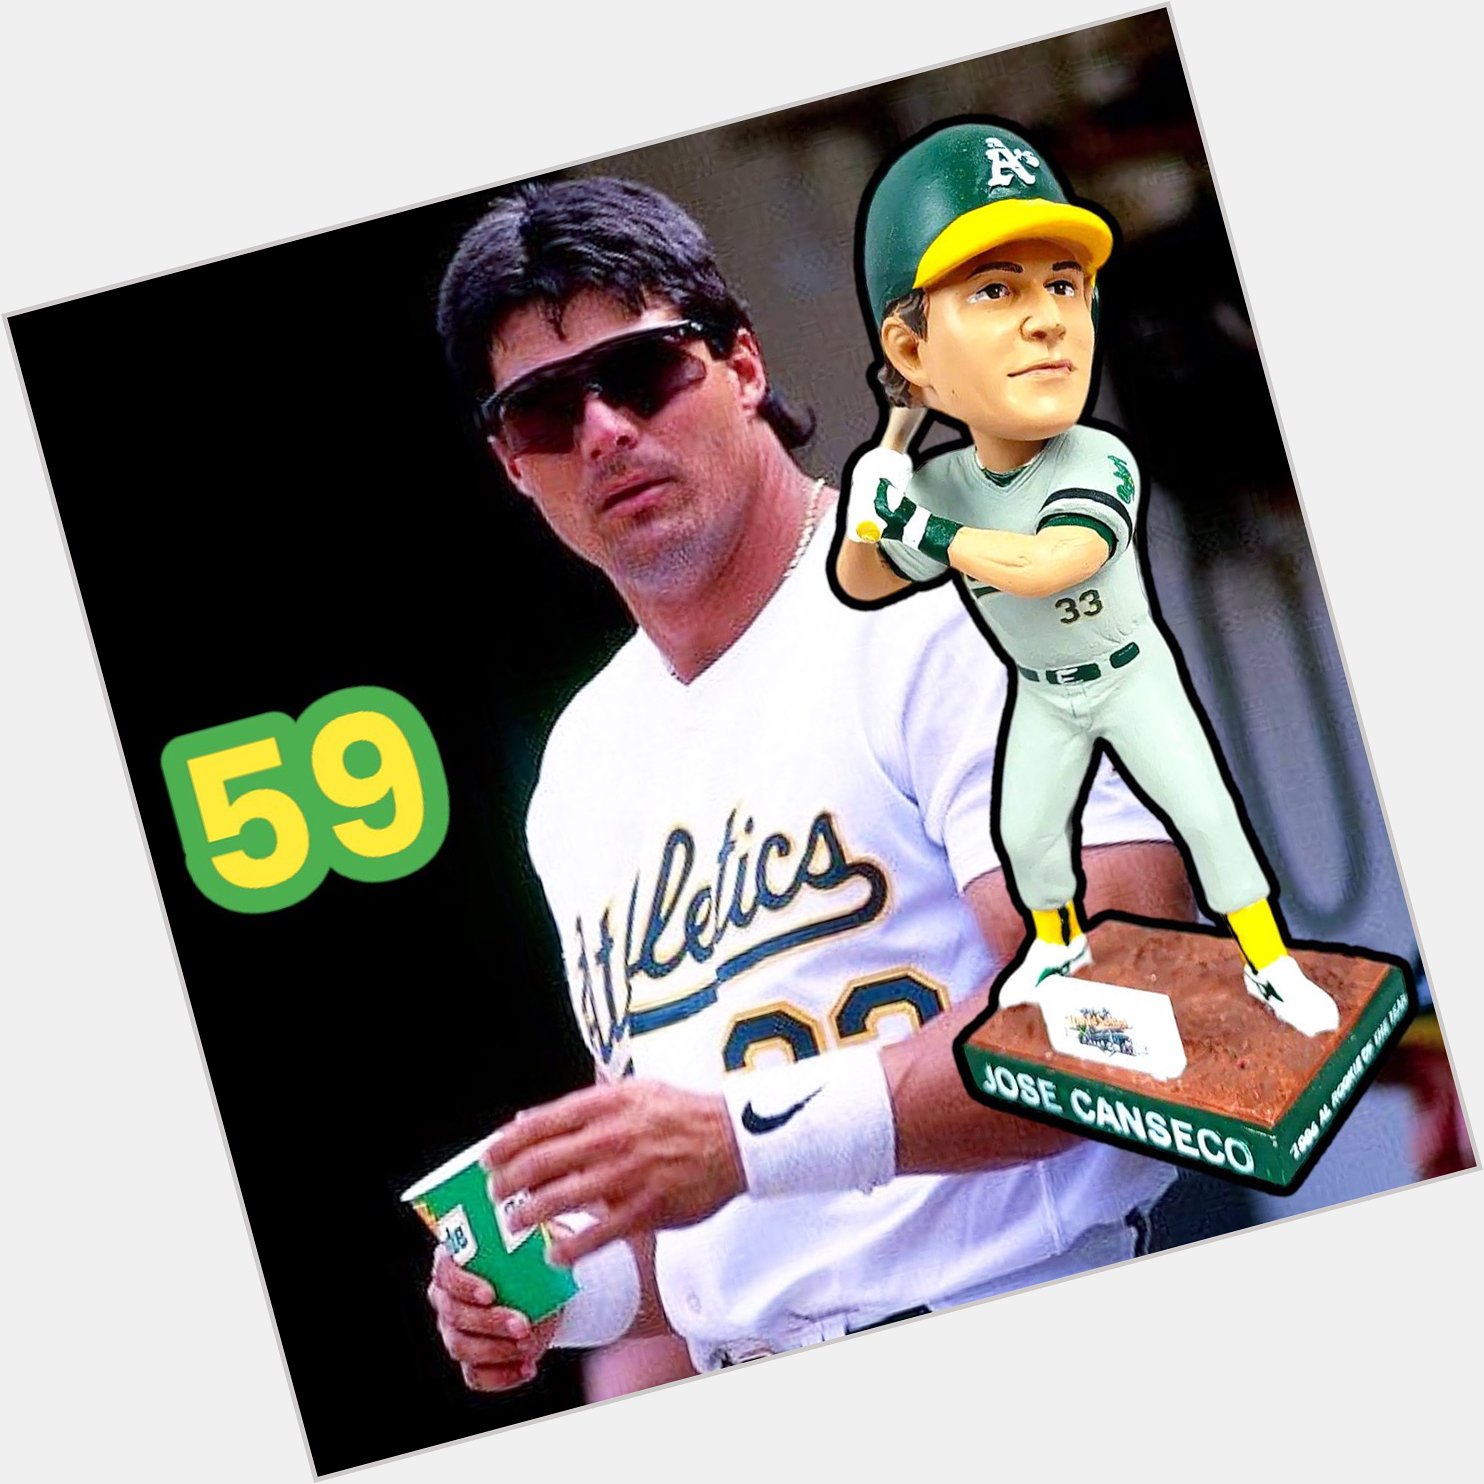 Happy 59th birthday to Jose Canseco. One of the most colorful personalities to ever play the game.   